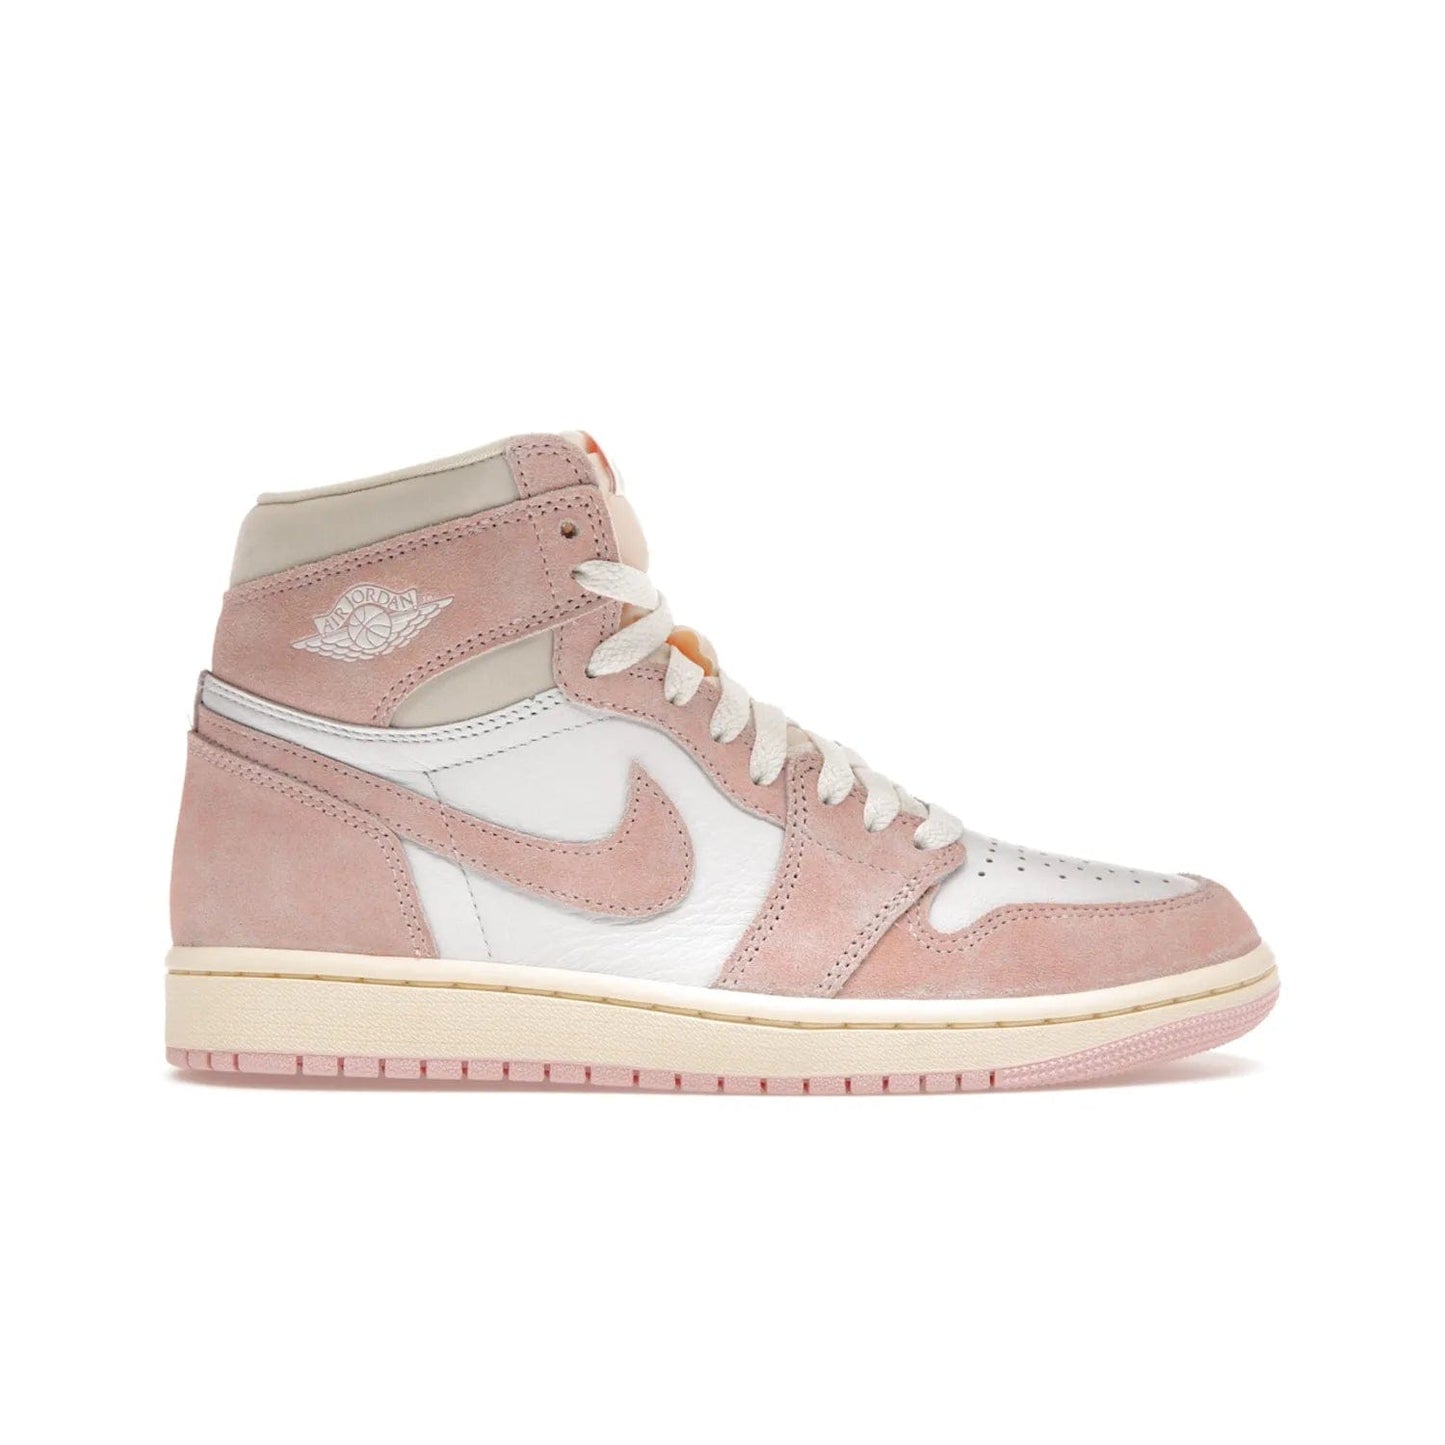 Jordan 1 Retro High OG Washed Pink (Women's) - Image 1 - Only at www.BallersClubKickz.com - Iconic Air Jordan 1 Retro High OG for women with unique pink suede and white leather uppers. Get the timeless look on April 22, 2023.